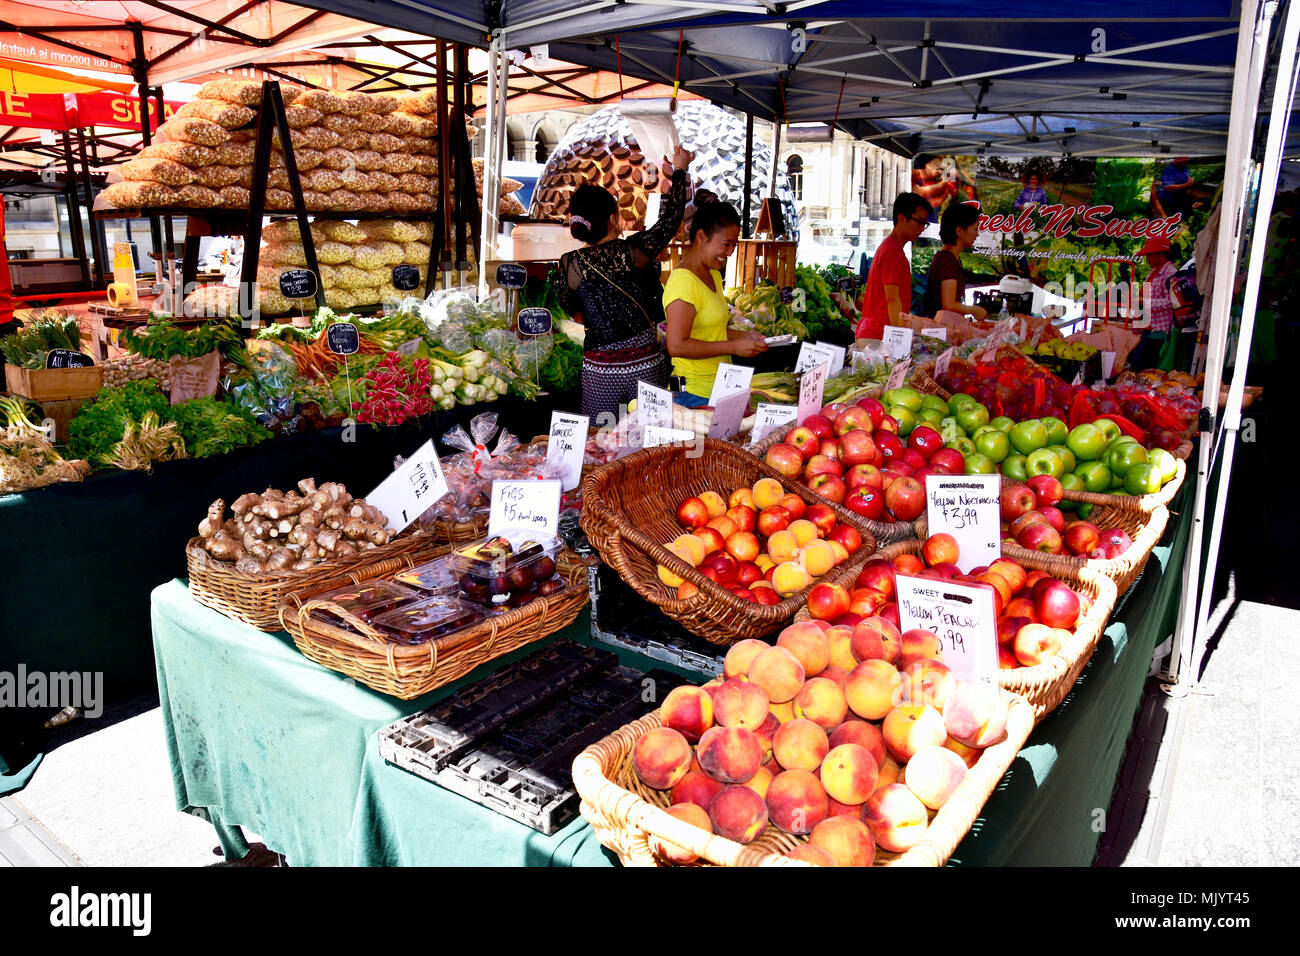 FRESH FRUIT AND VEGETABLES FOR SALE AT A MARKET Stock Photo